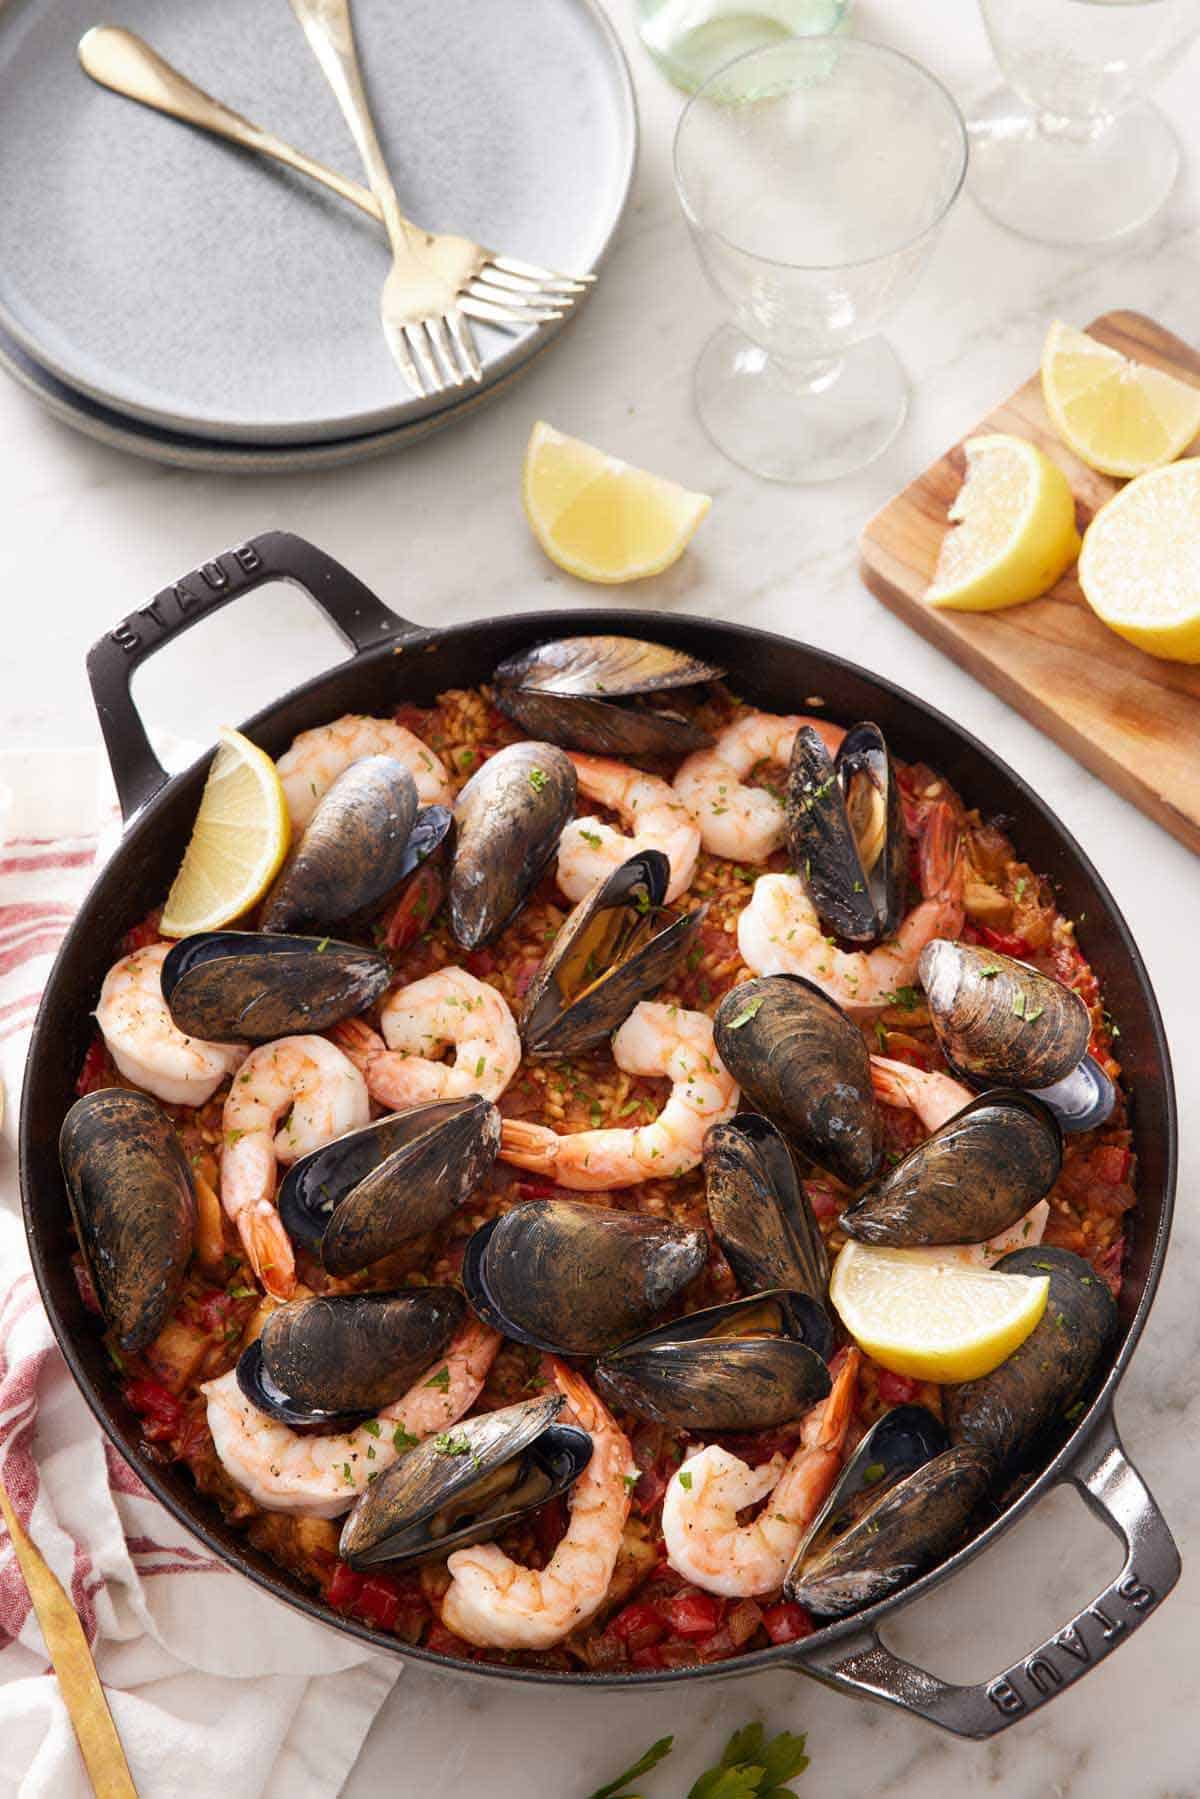 Overhead view of a skillet of paella with a stack of plates, forks, and cut lemon wedges behind it.